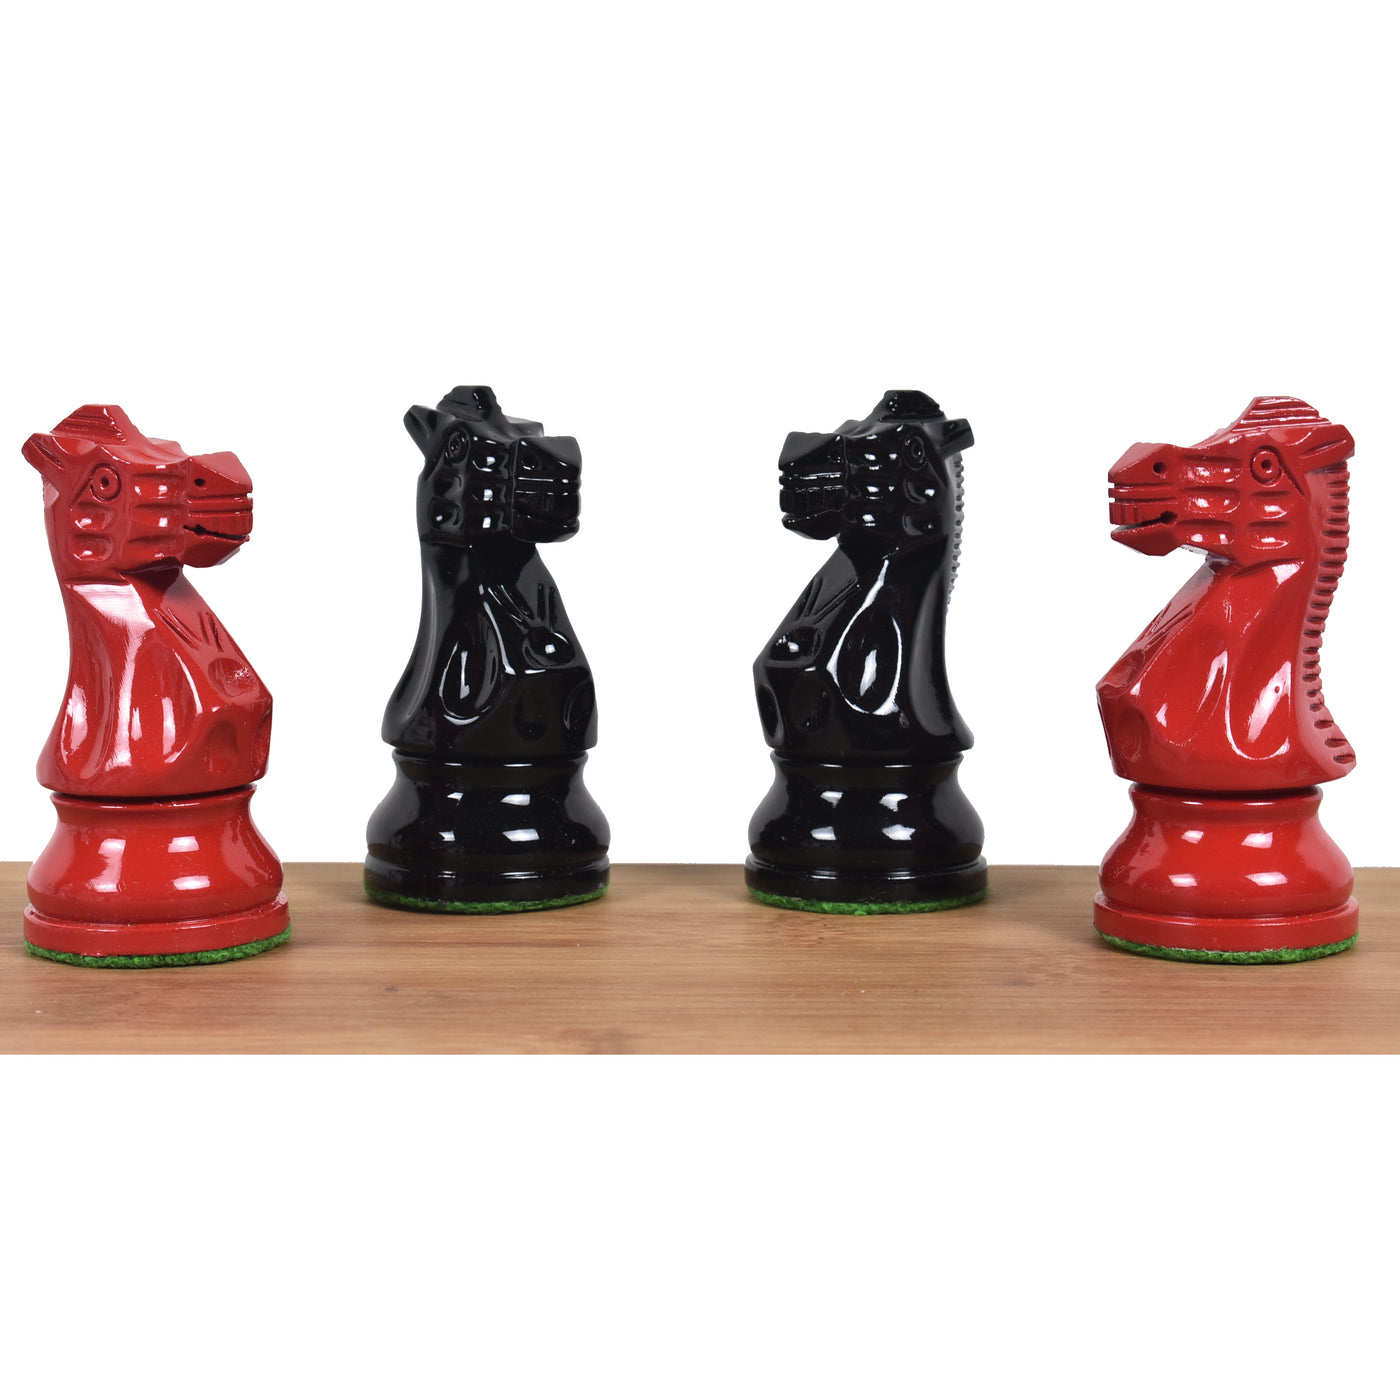 Red & Black Painted Chess Pieces set